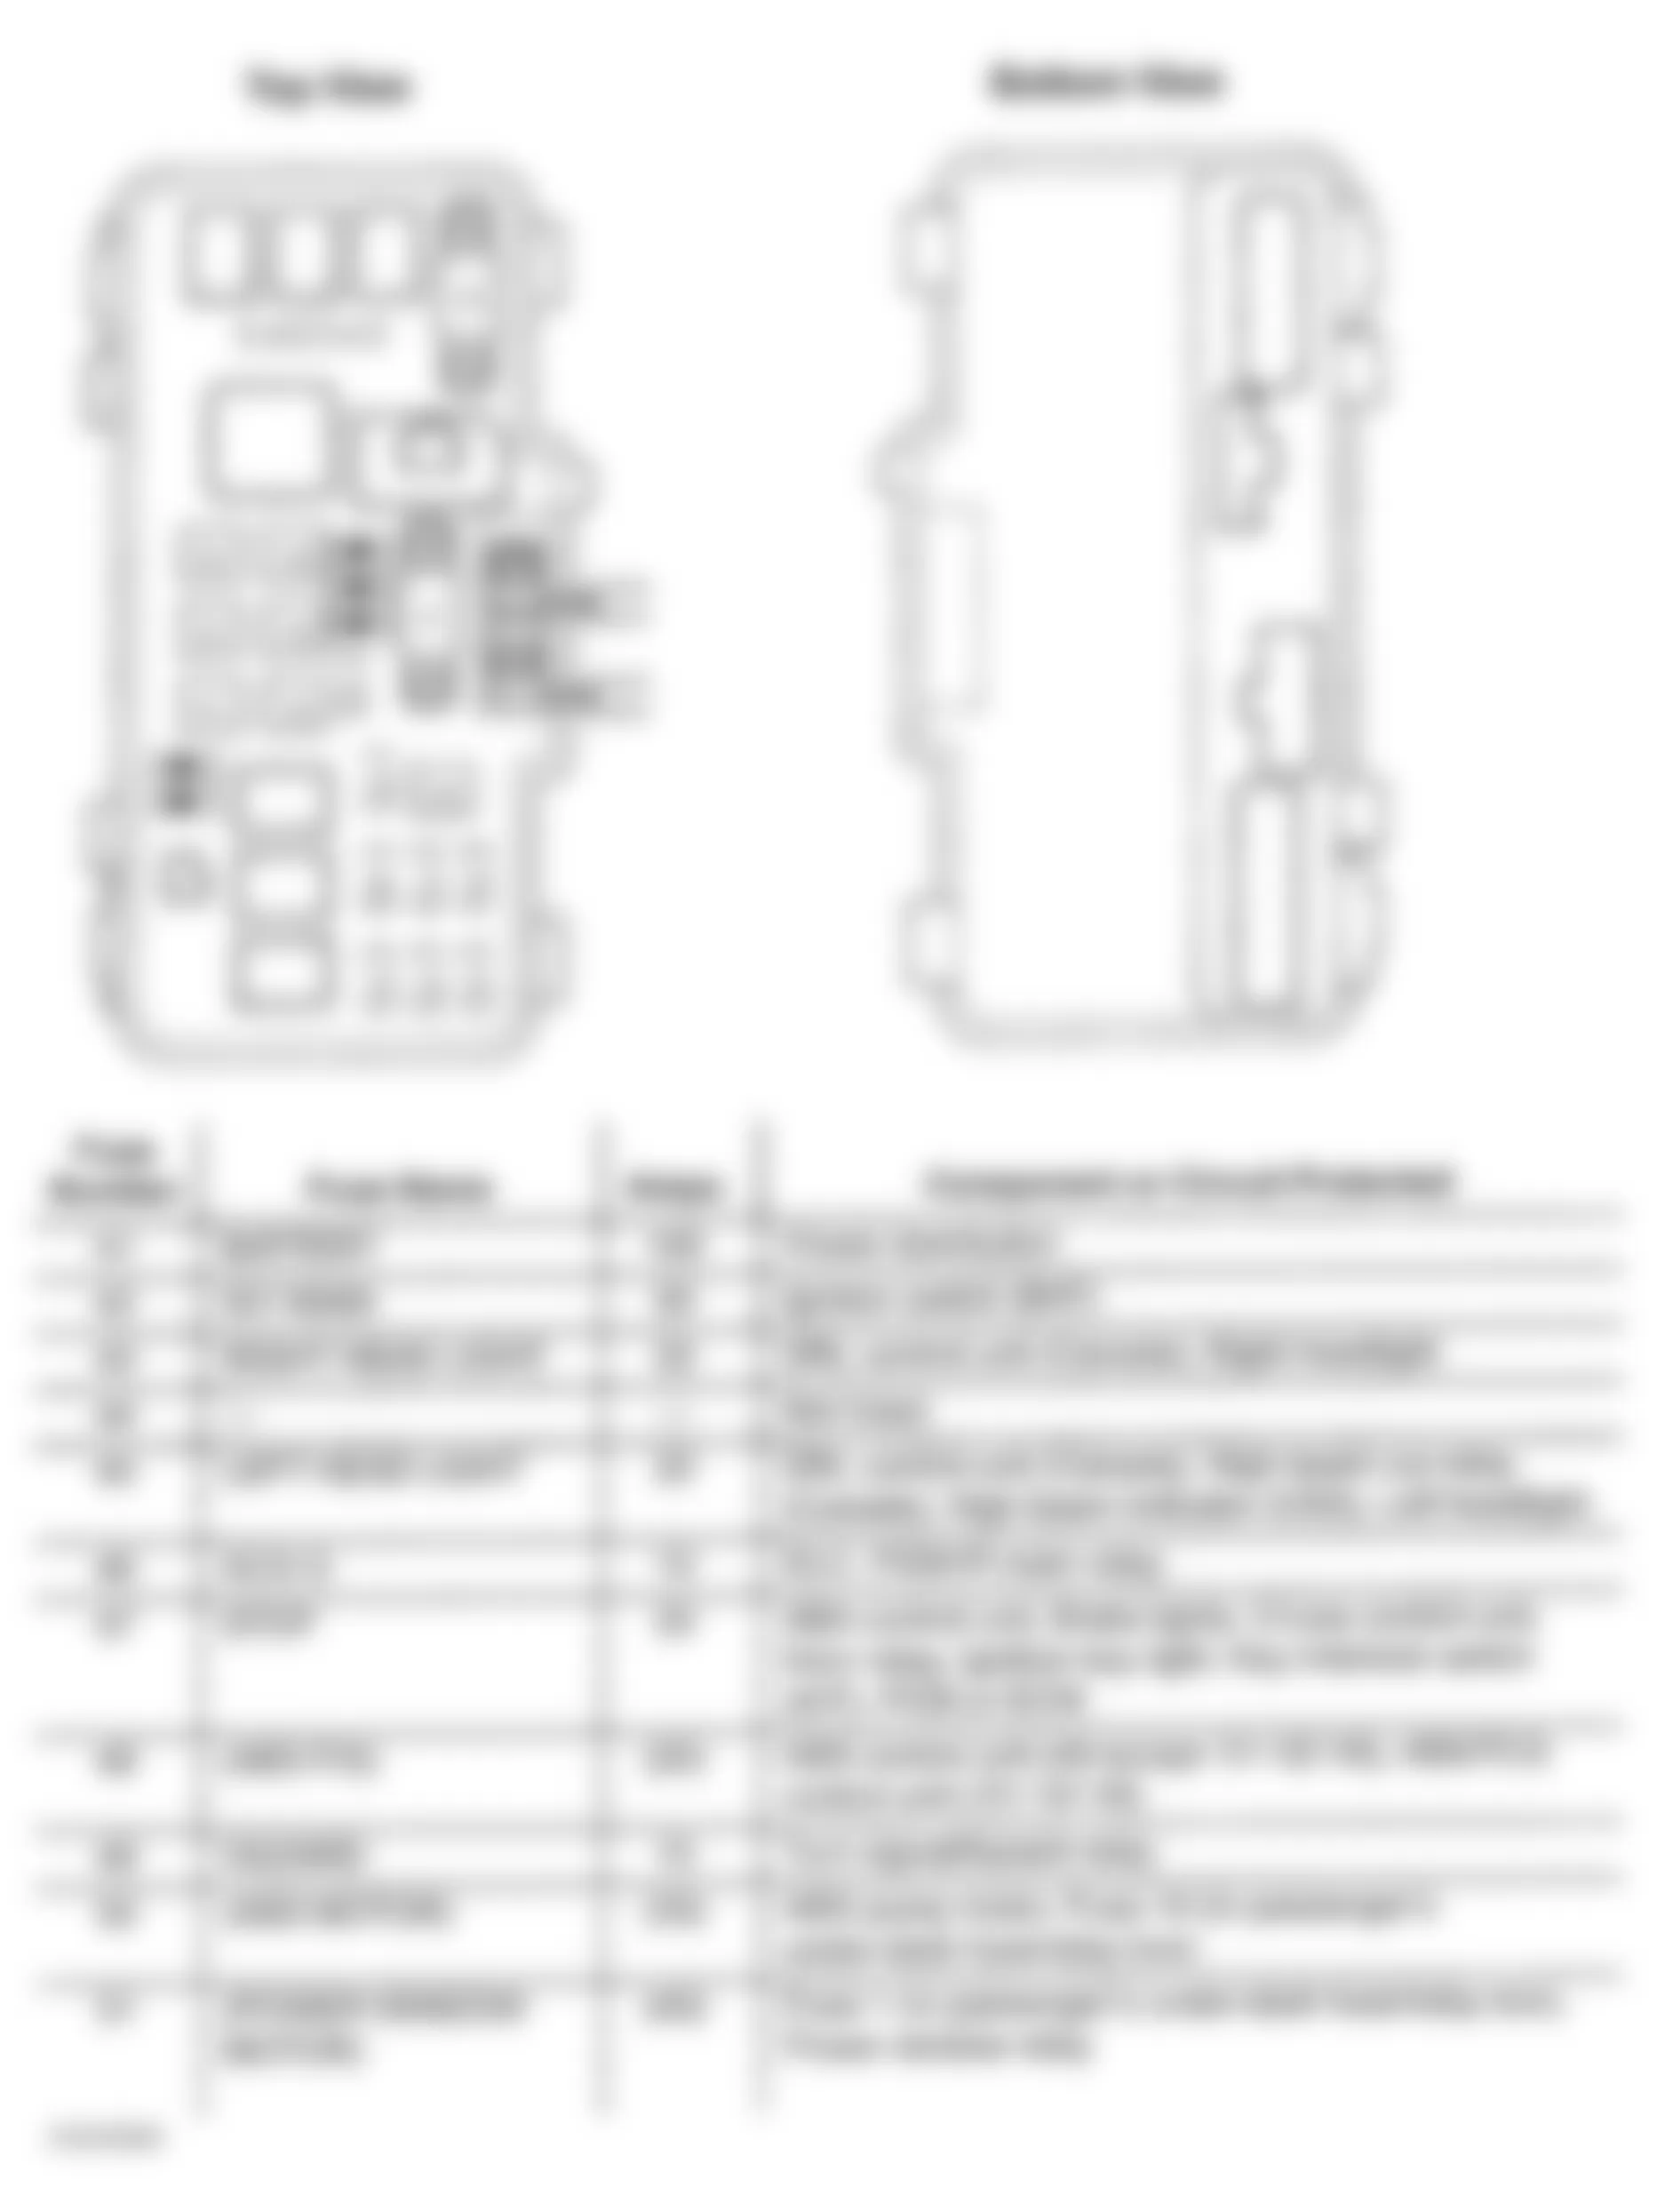 Honda Accord EX 2002 - Component Locations -  Identifying Under-Hood Fuse/Relay Box Components (1 Of 2)